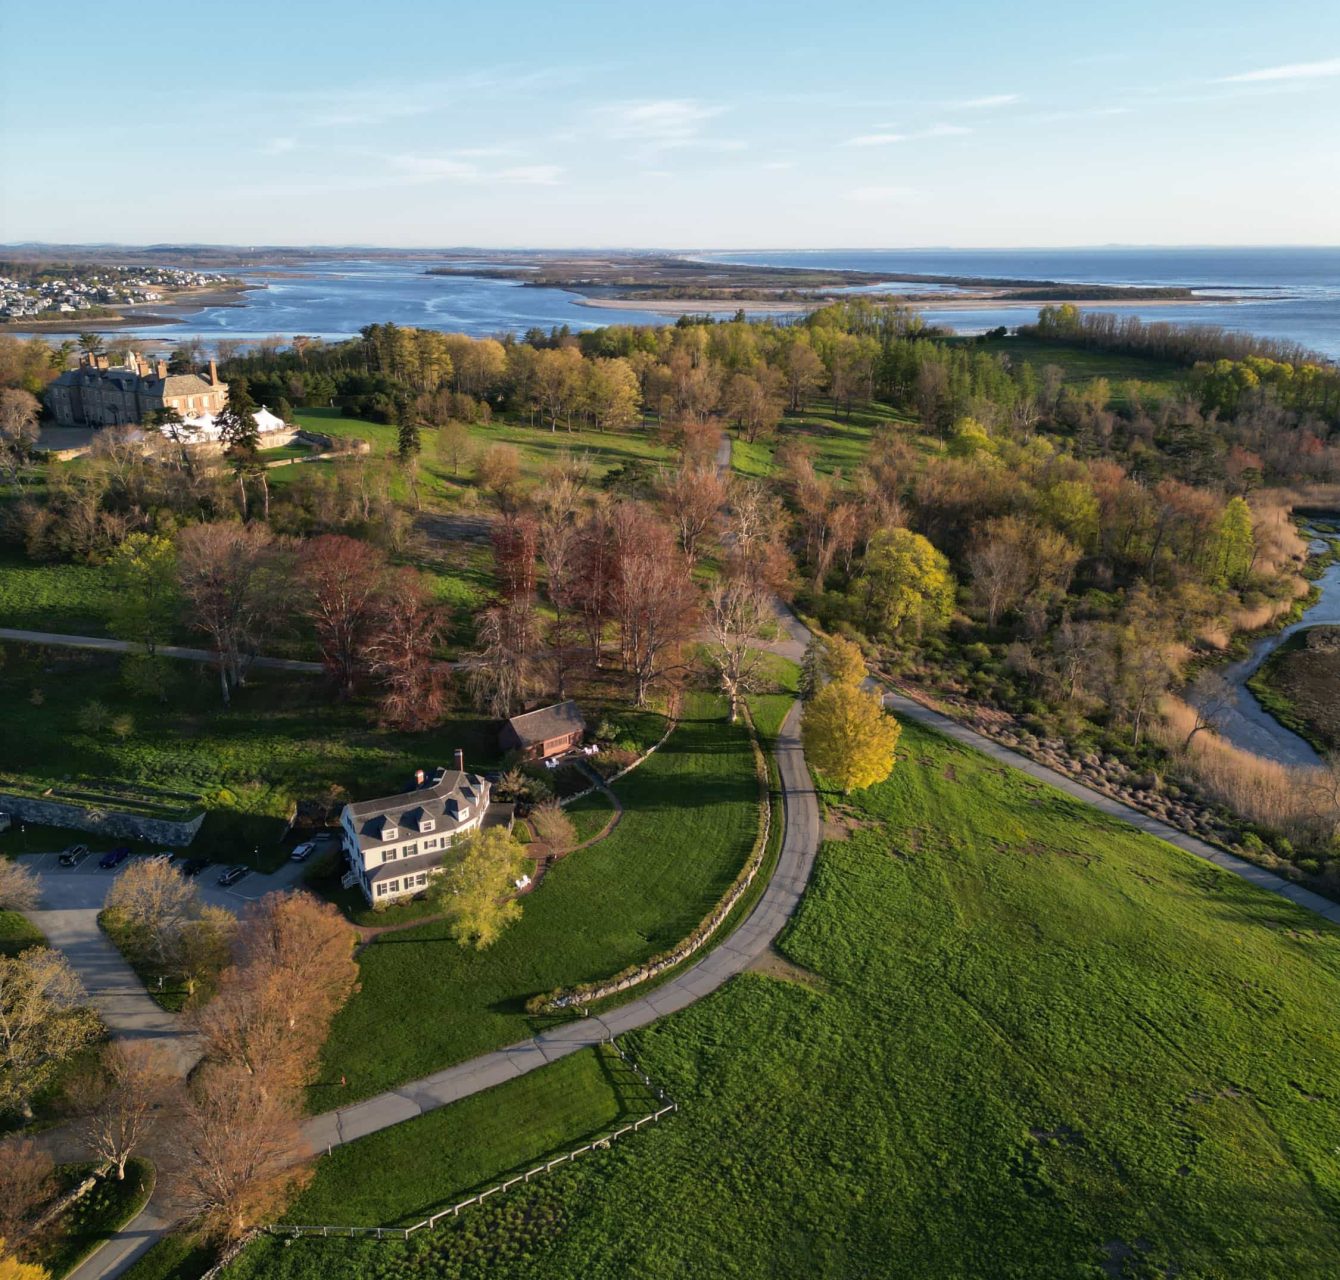 Drone photography of the Crane Estate marshes and land around Ipswich, MA wedding venue